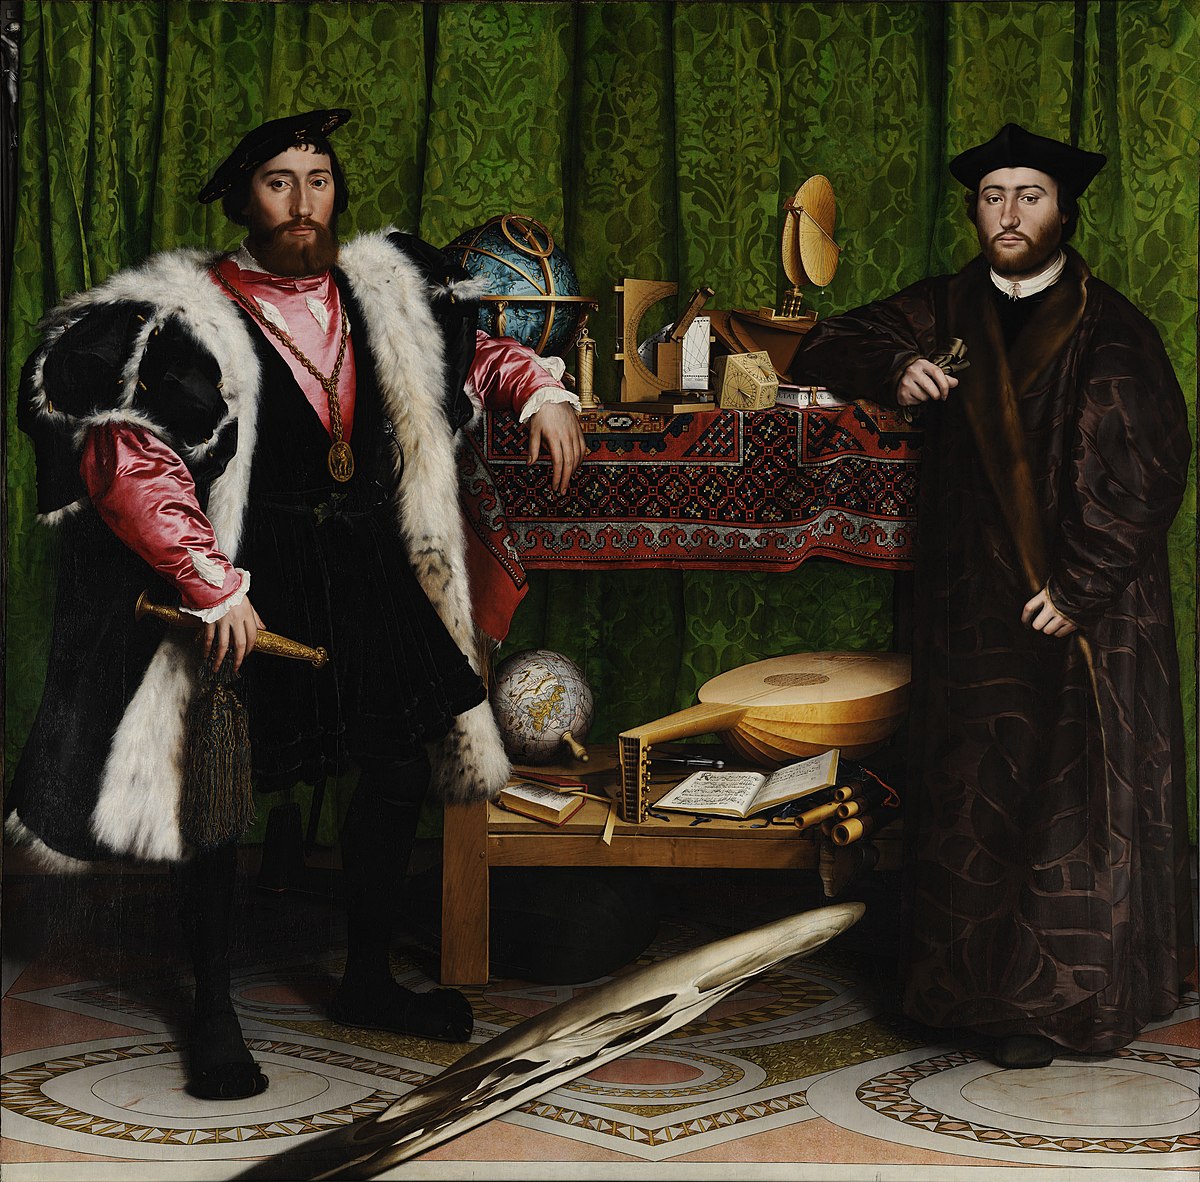 2020 Online Art Exhibitions 1200px-Hans_Holbein_the_Younger_-_The_Ambassadors_-_Google_Art_Project